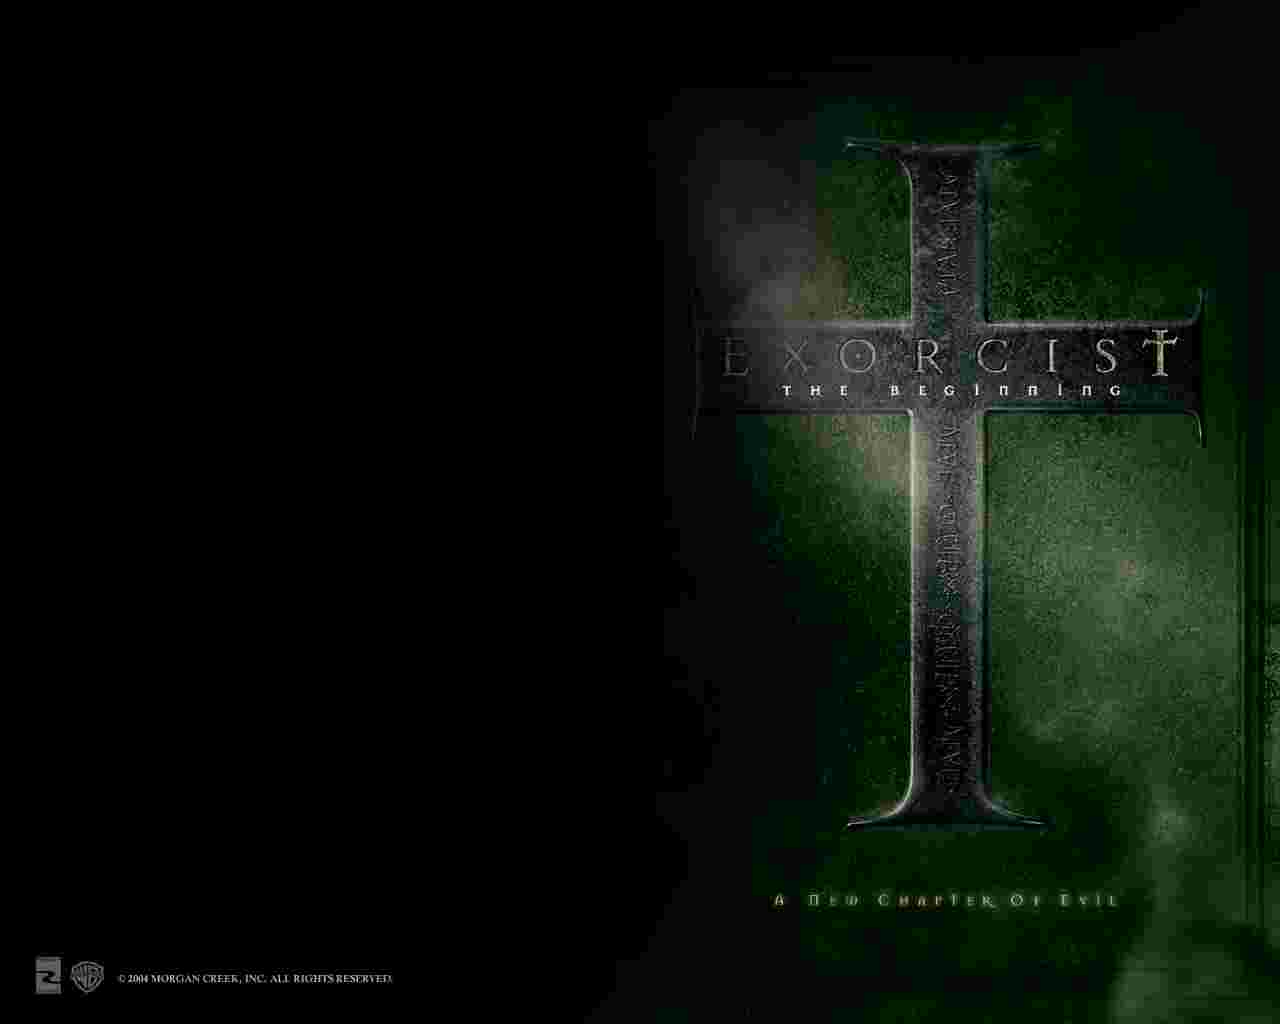 exorcist wallpaper03 128003124154 wallpaper   The Exorcist   Movies 1280x1024